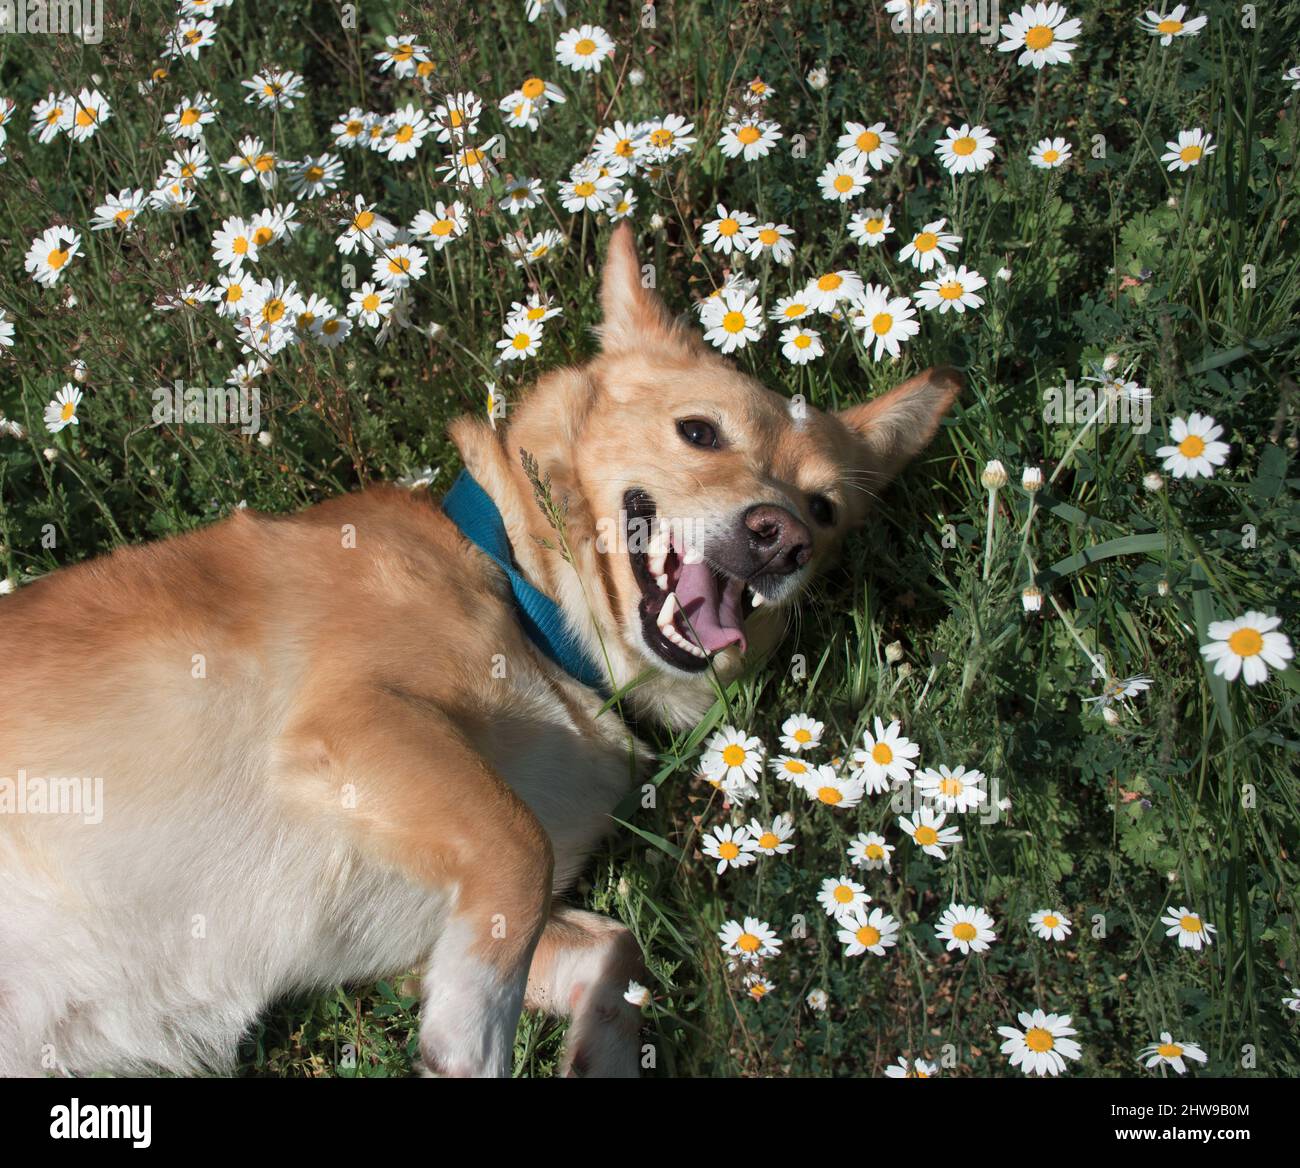 happy red dog wallows in the grass and daisies in nature on a spring day Stock Photo